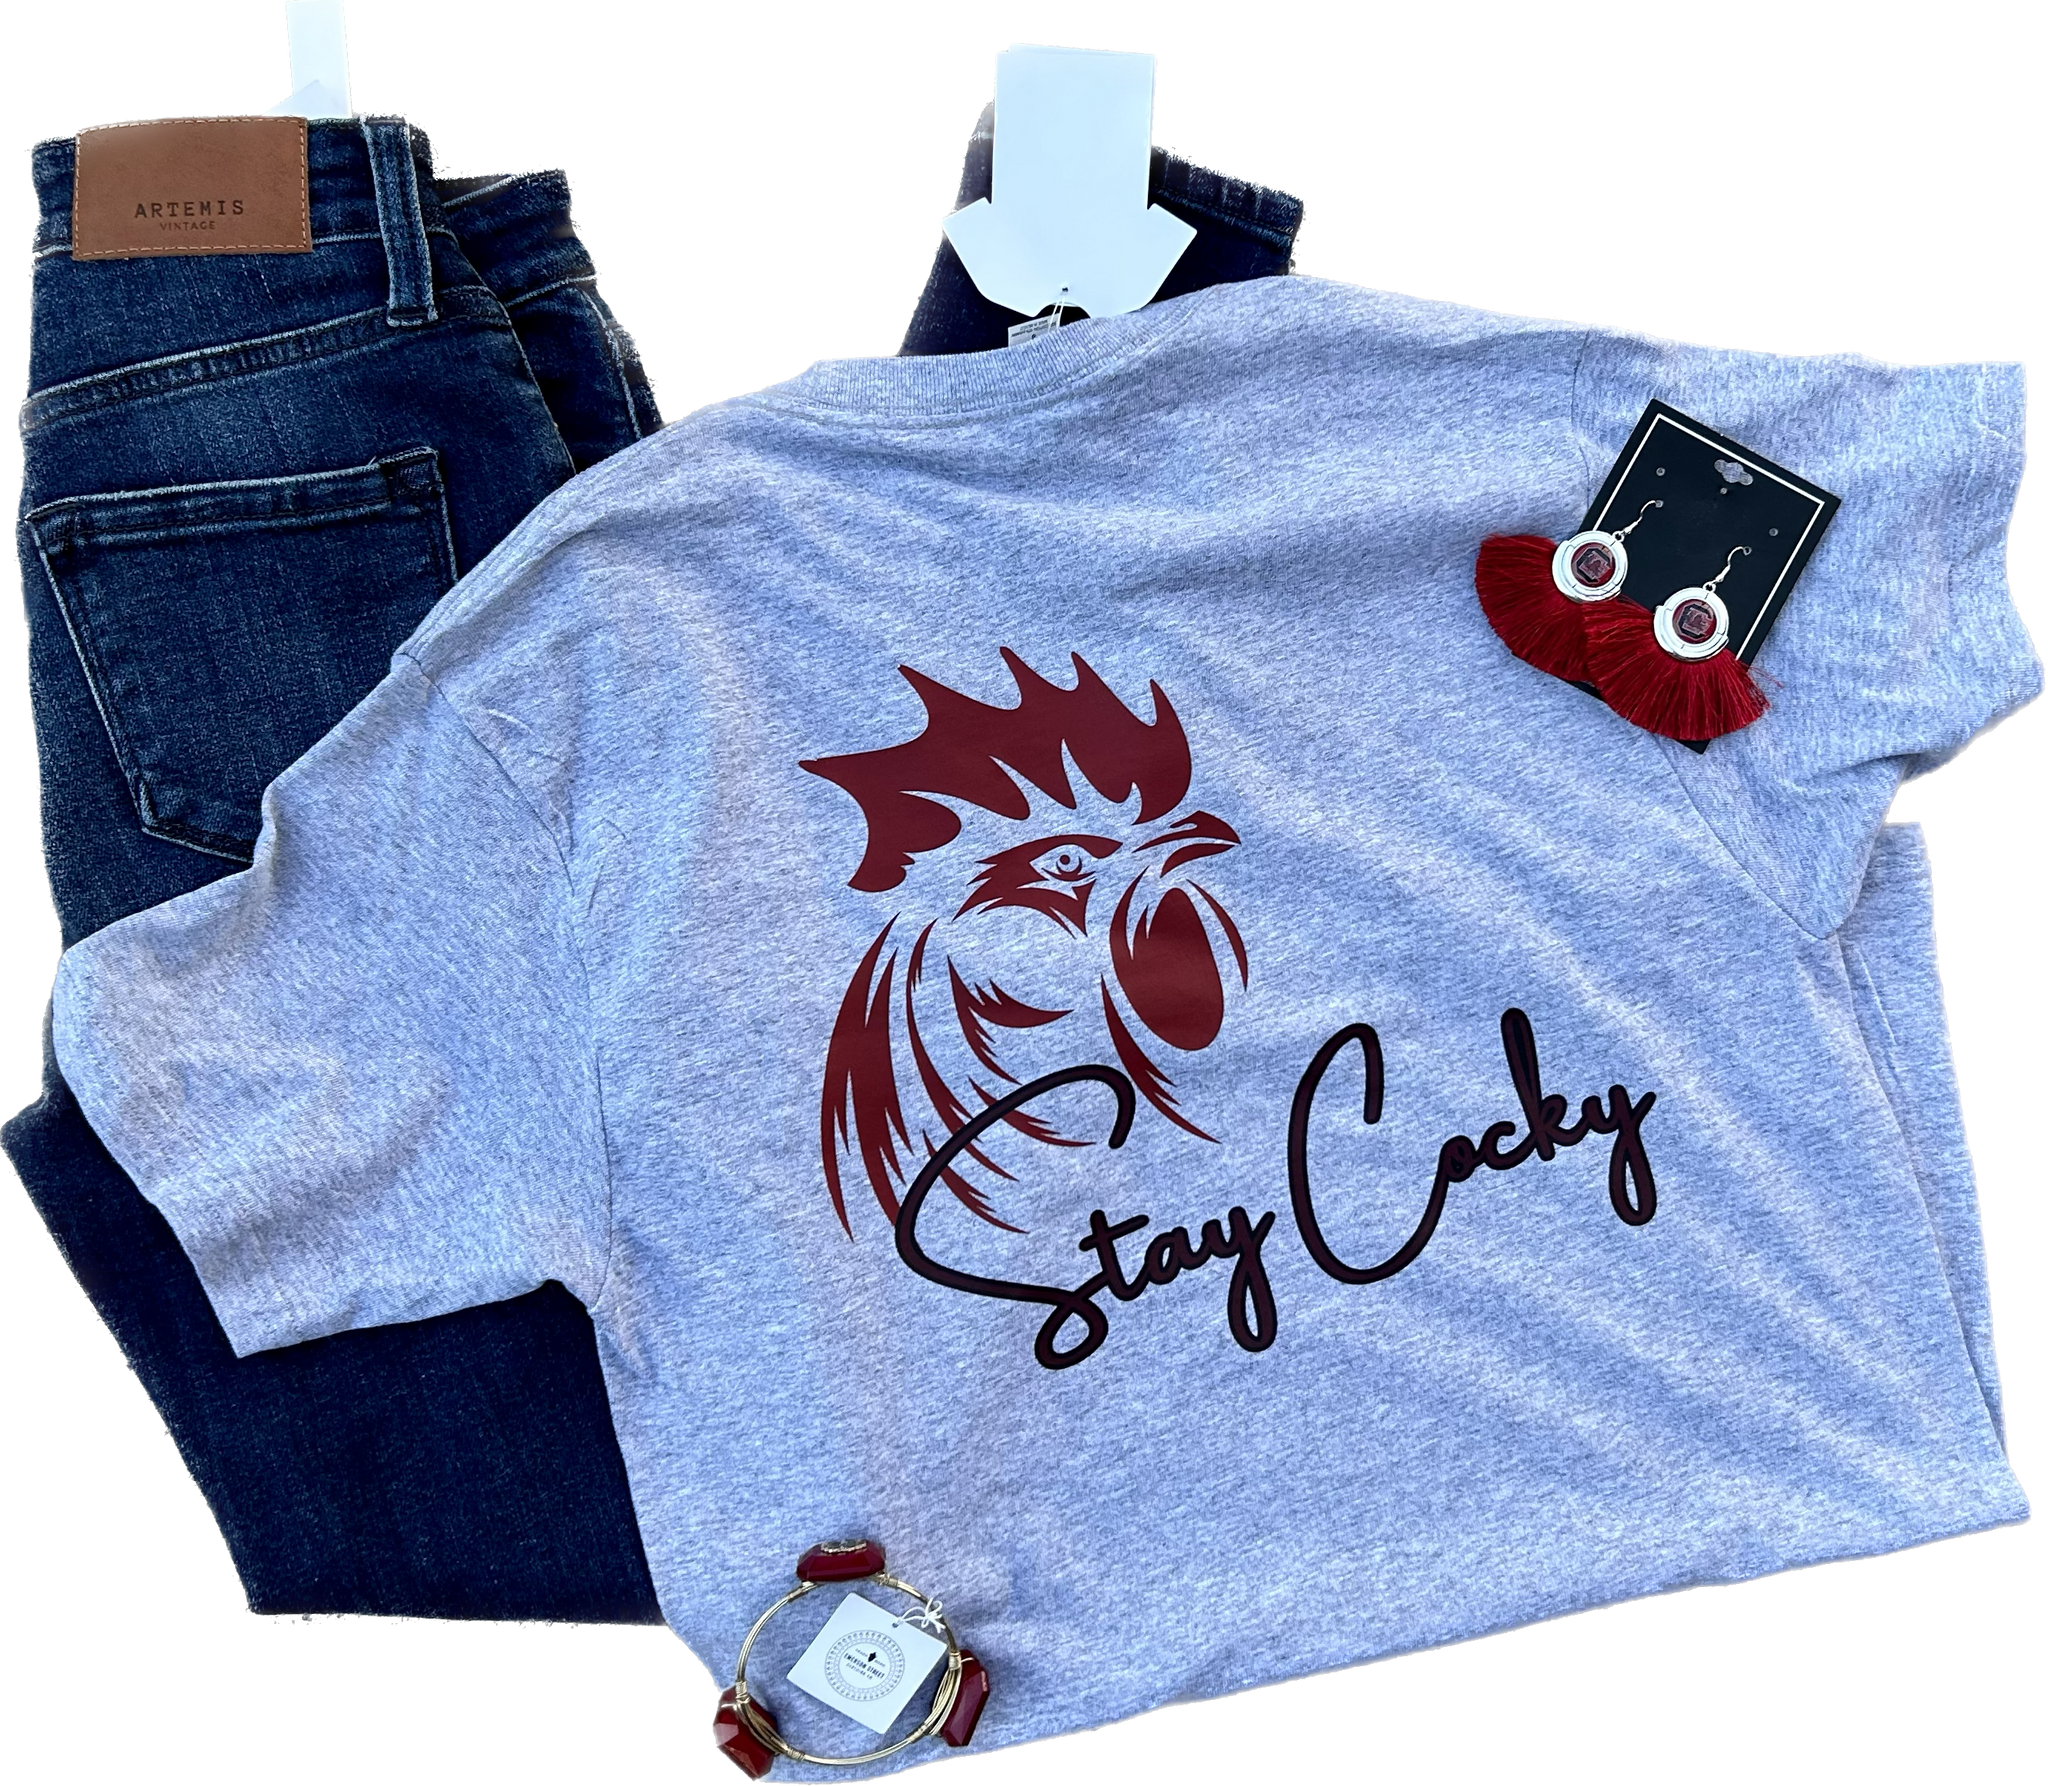 Stay Cocky T-Shirt*